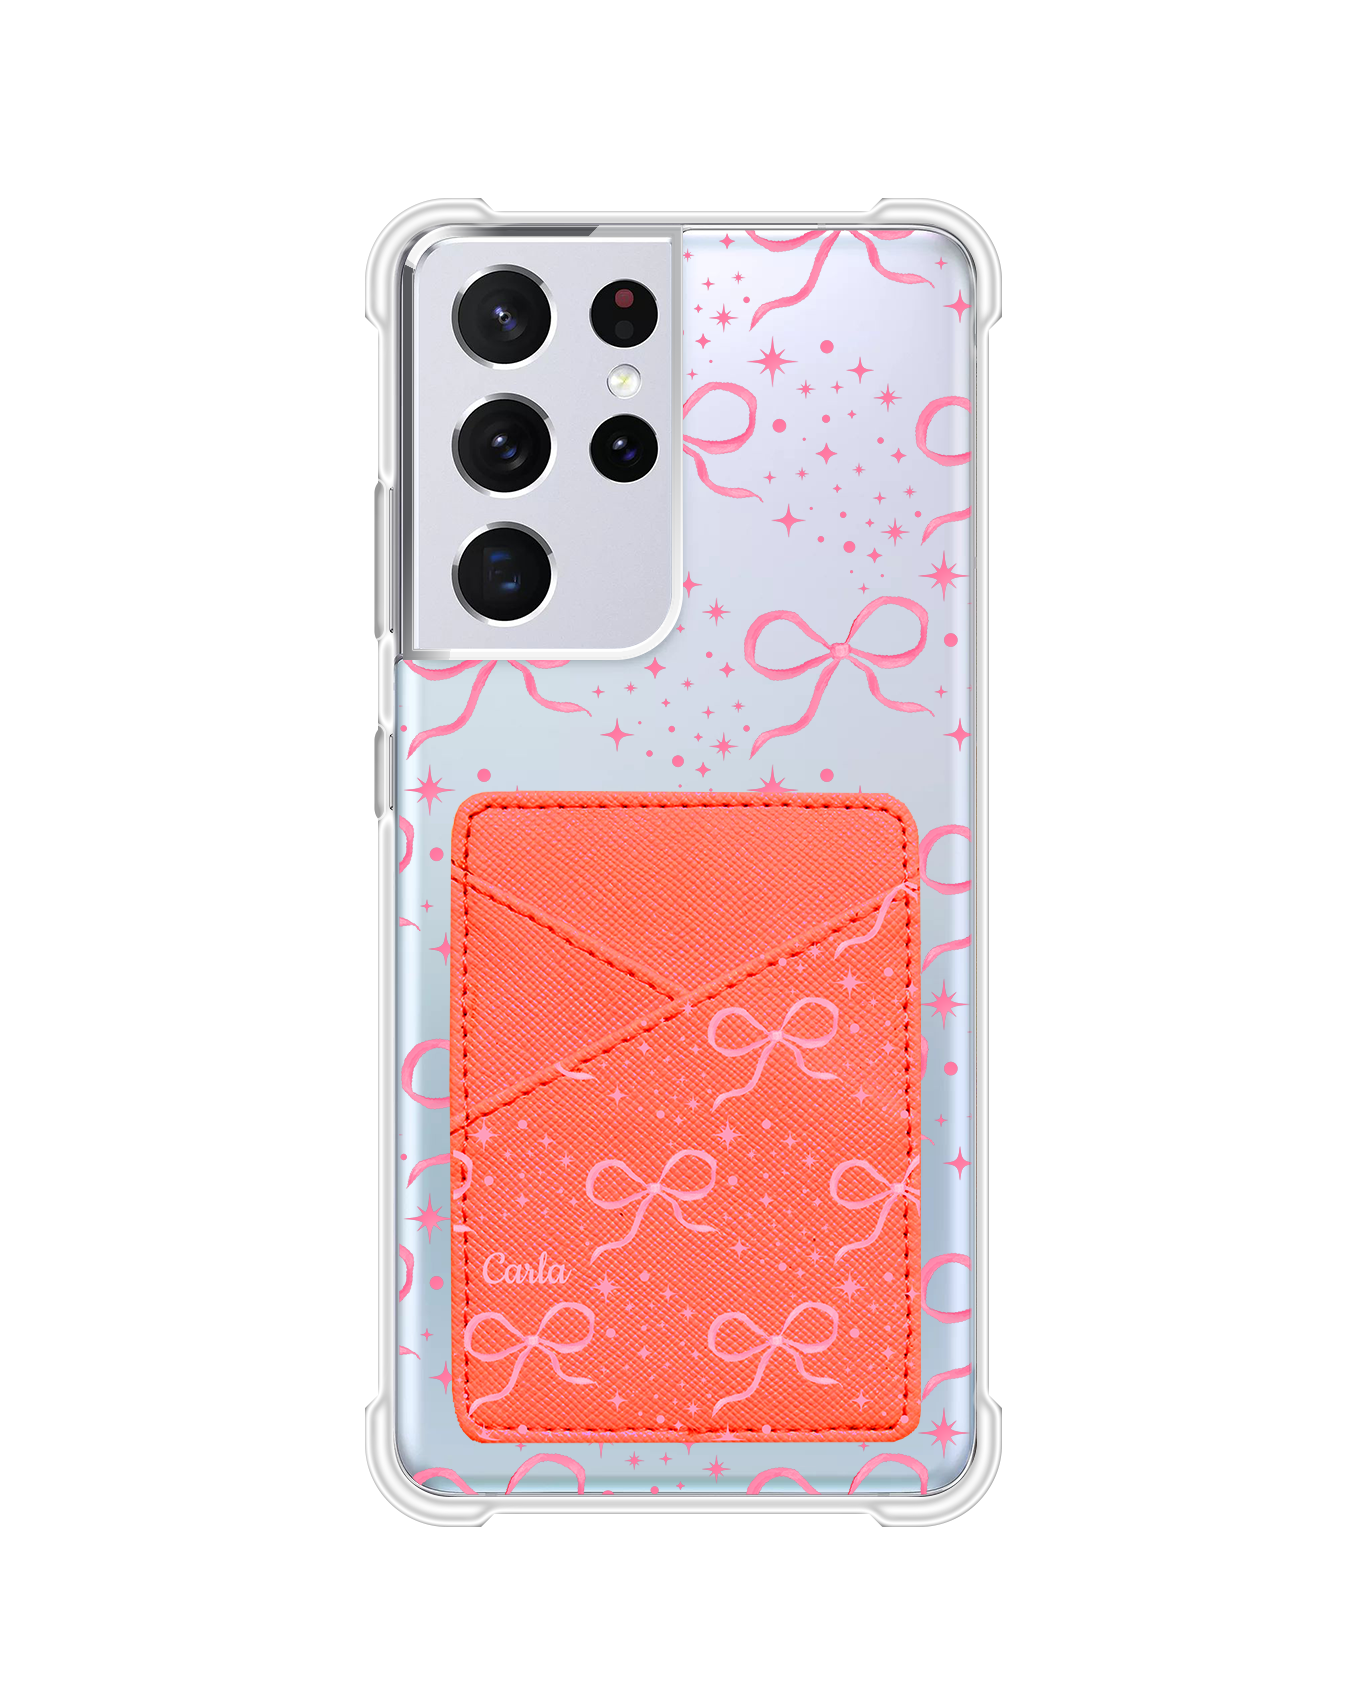 Android Phone Wallet Case - Coquette Glittery Blow